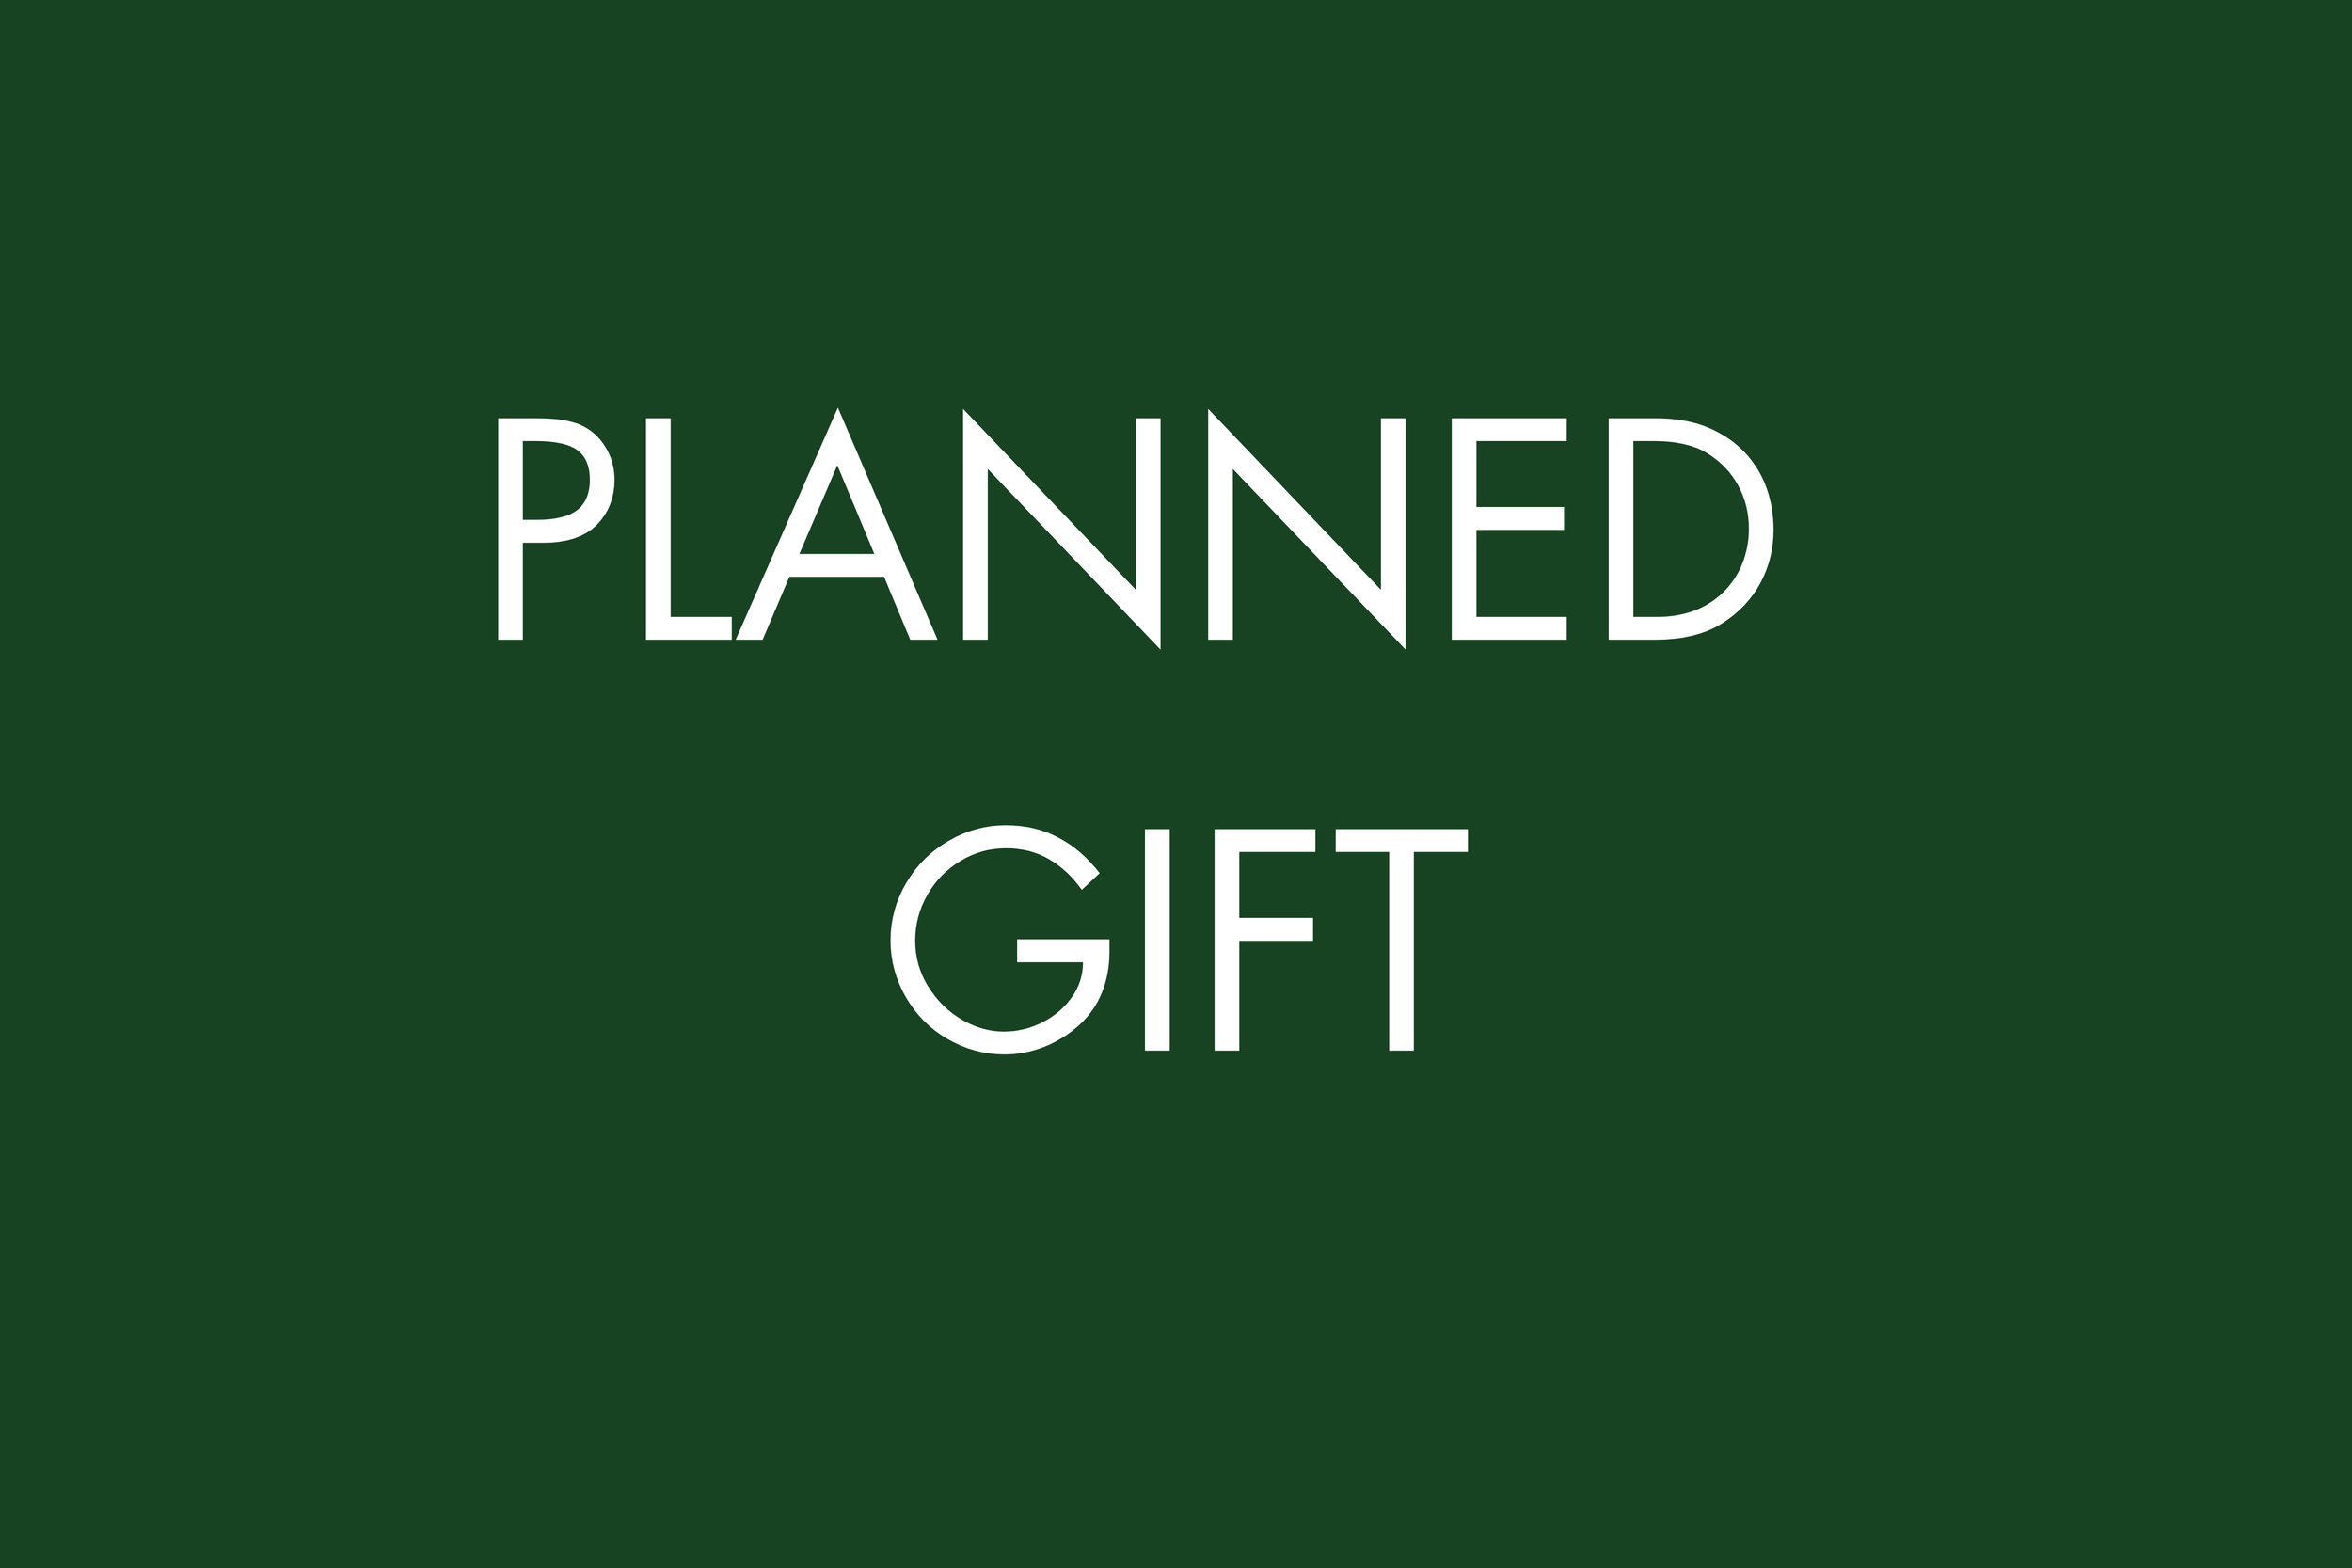 Planned gifts